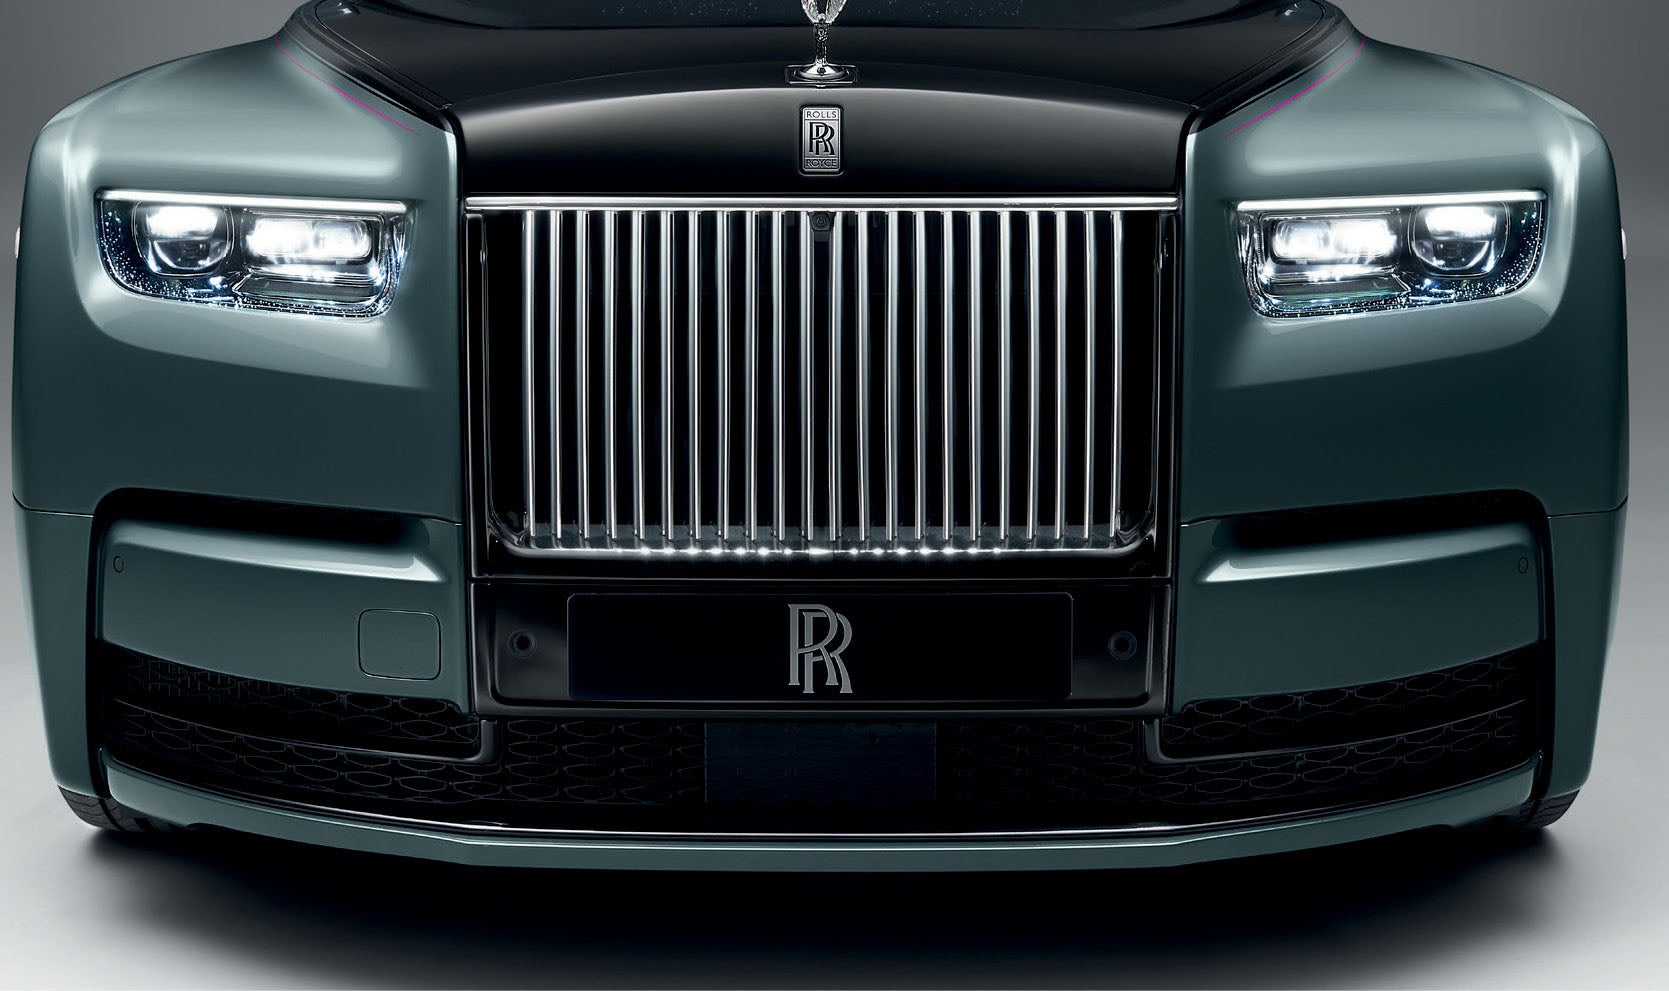 Rolls Royce officially unveils fully electric Spectre